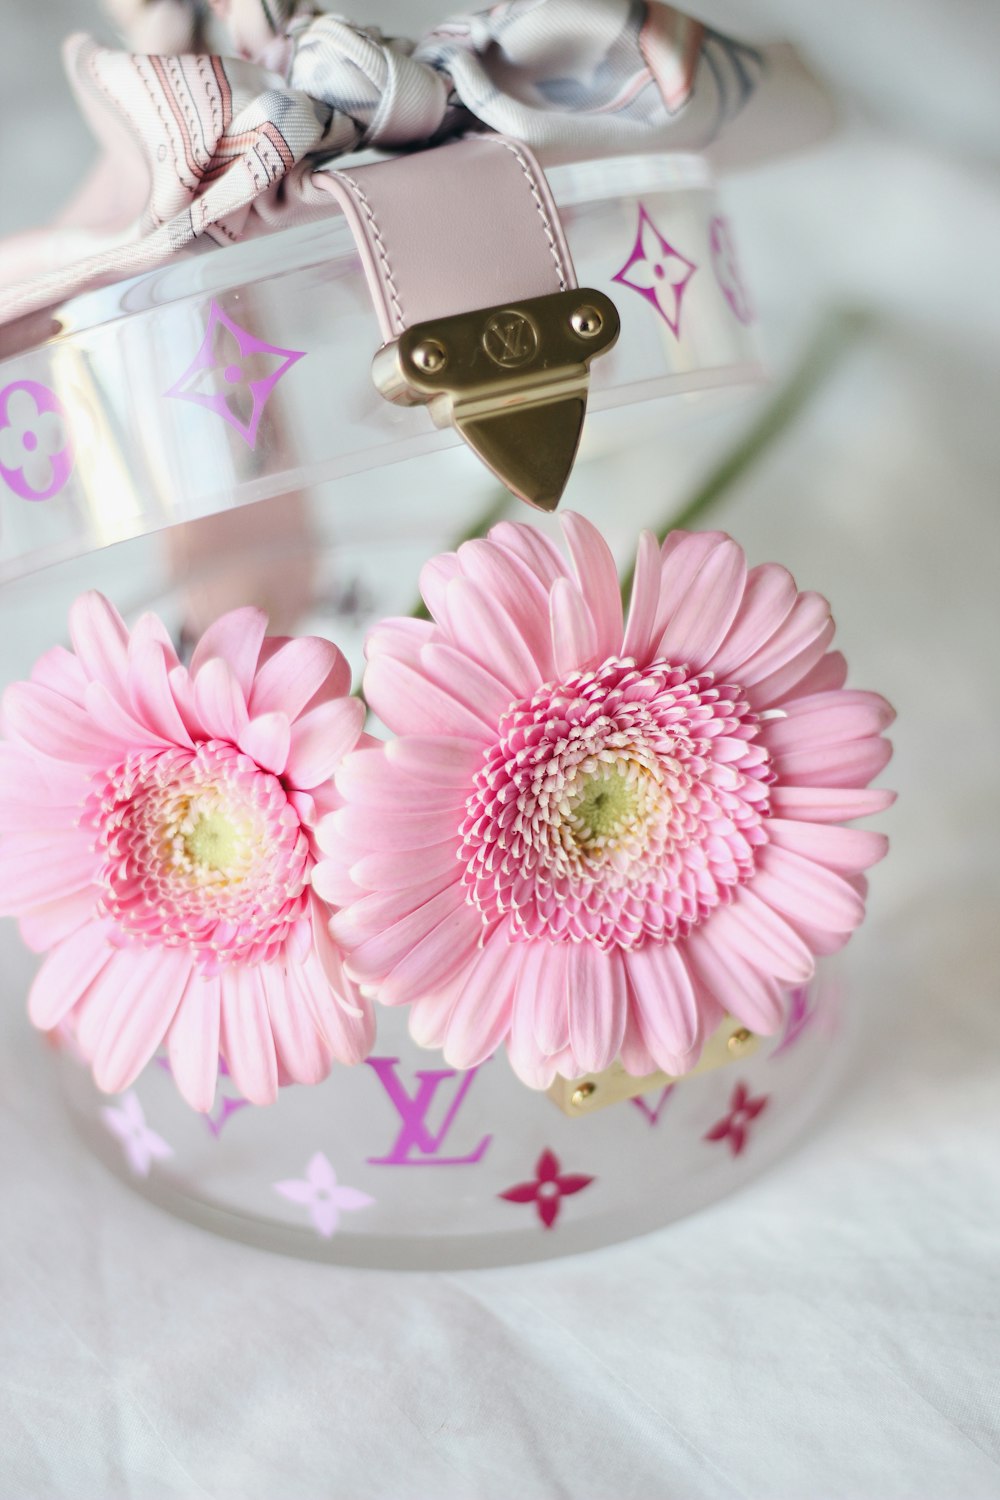 two pink flowers are in a clear vase